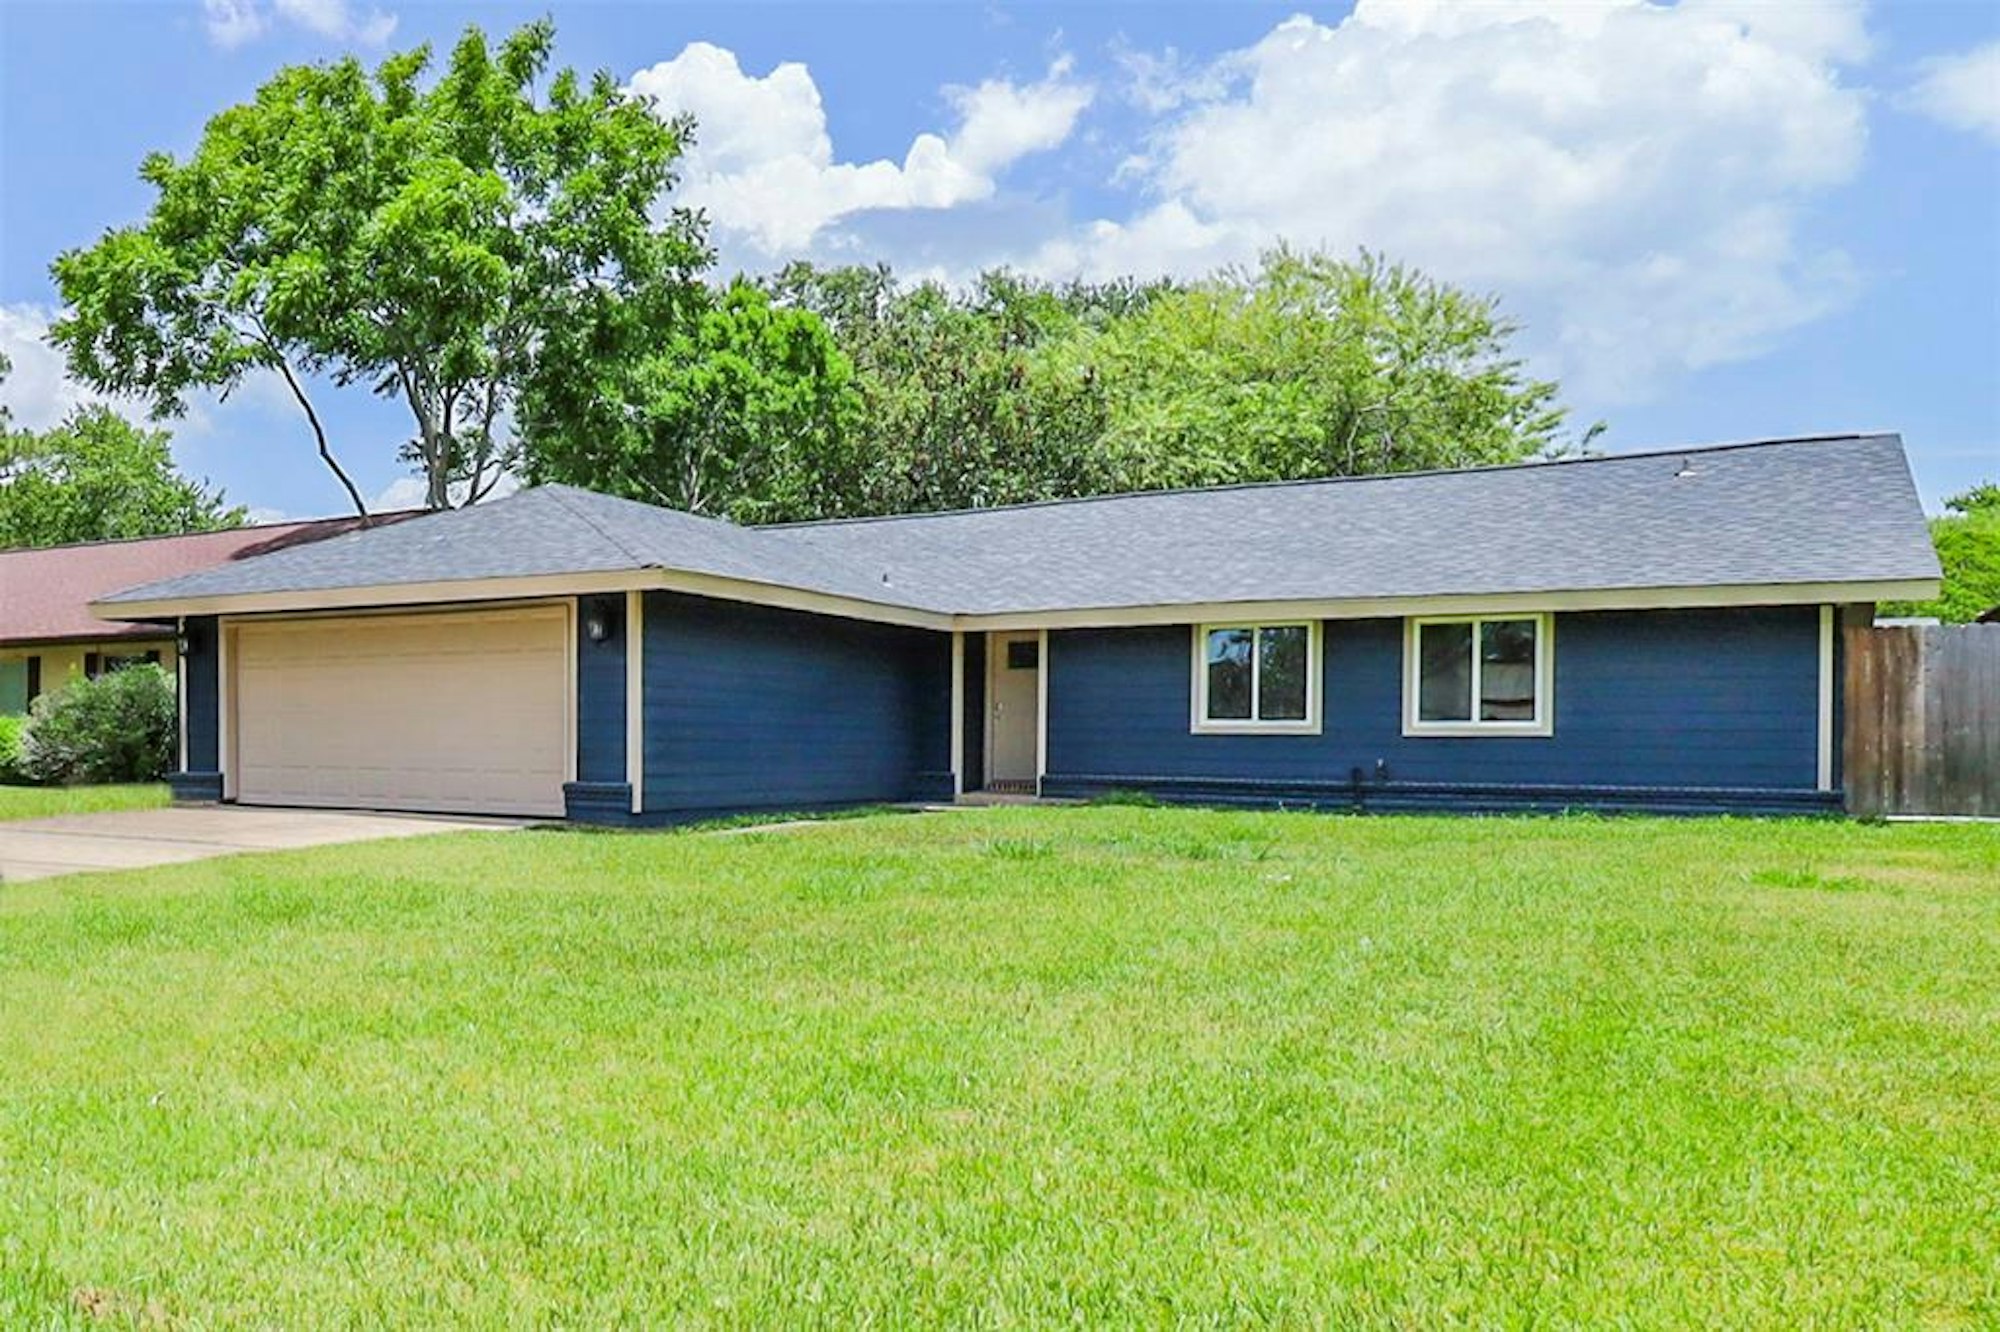 Photo 1 of 20 - 16927 Paint Rock Rd, Friendswood, TX 77546